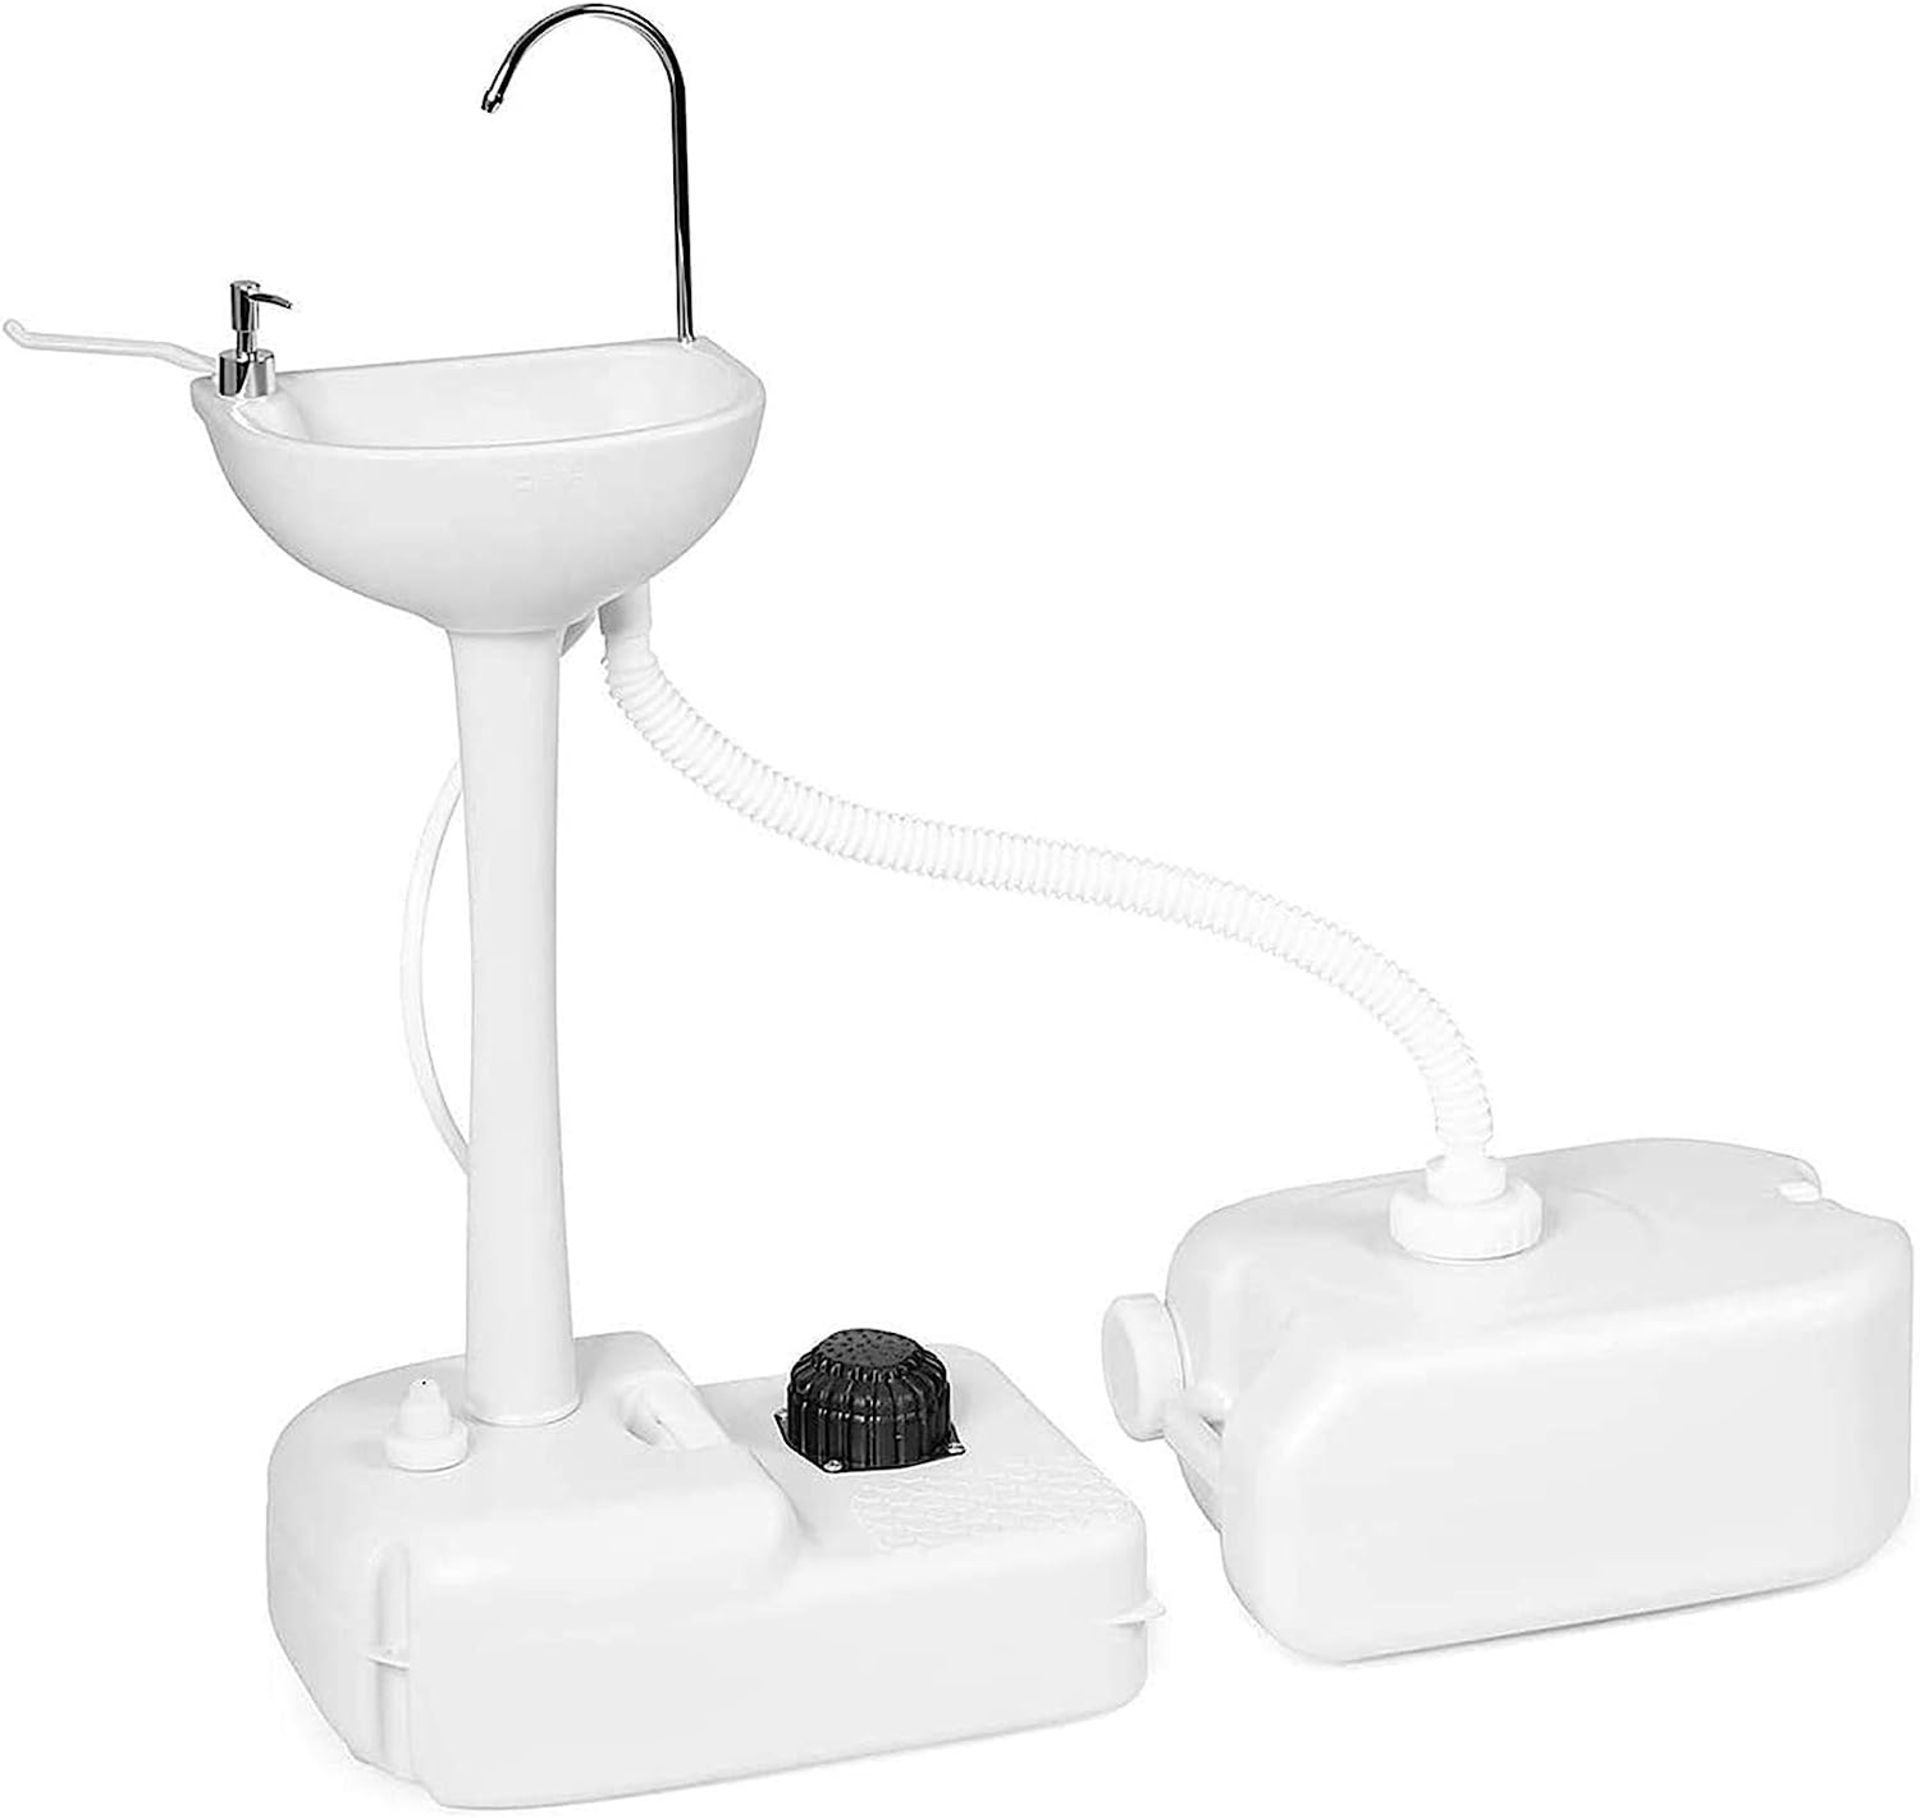 BRAND NEW PORTABLE REMOVABLE OUTDOOR HAND SINK WITH 24L RECOVERY TANK RRP £229